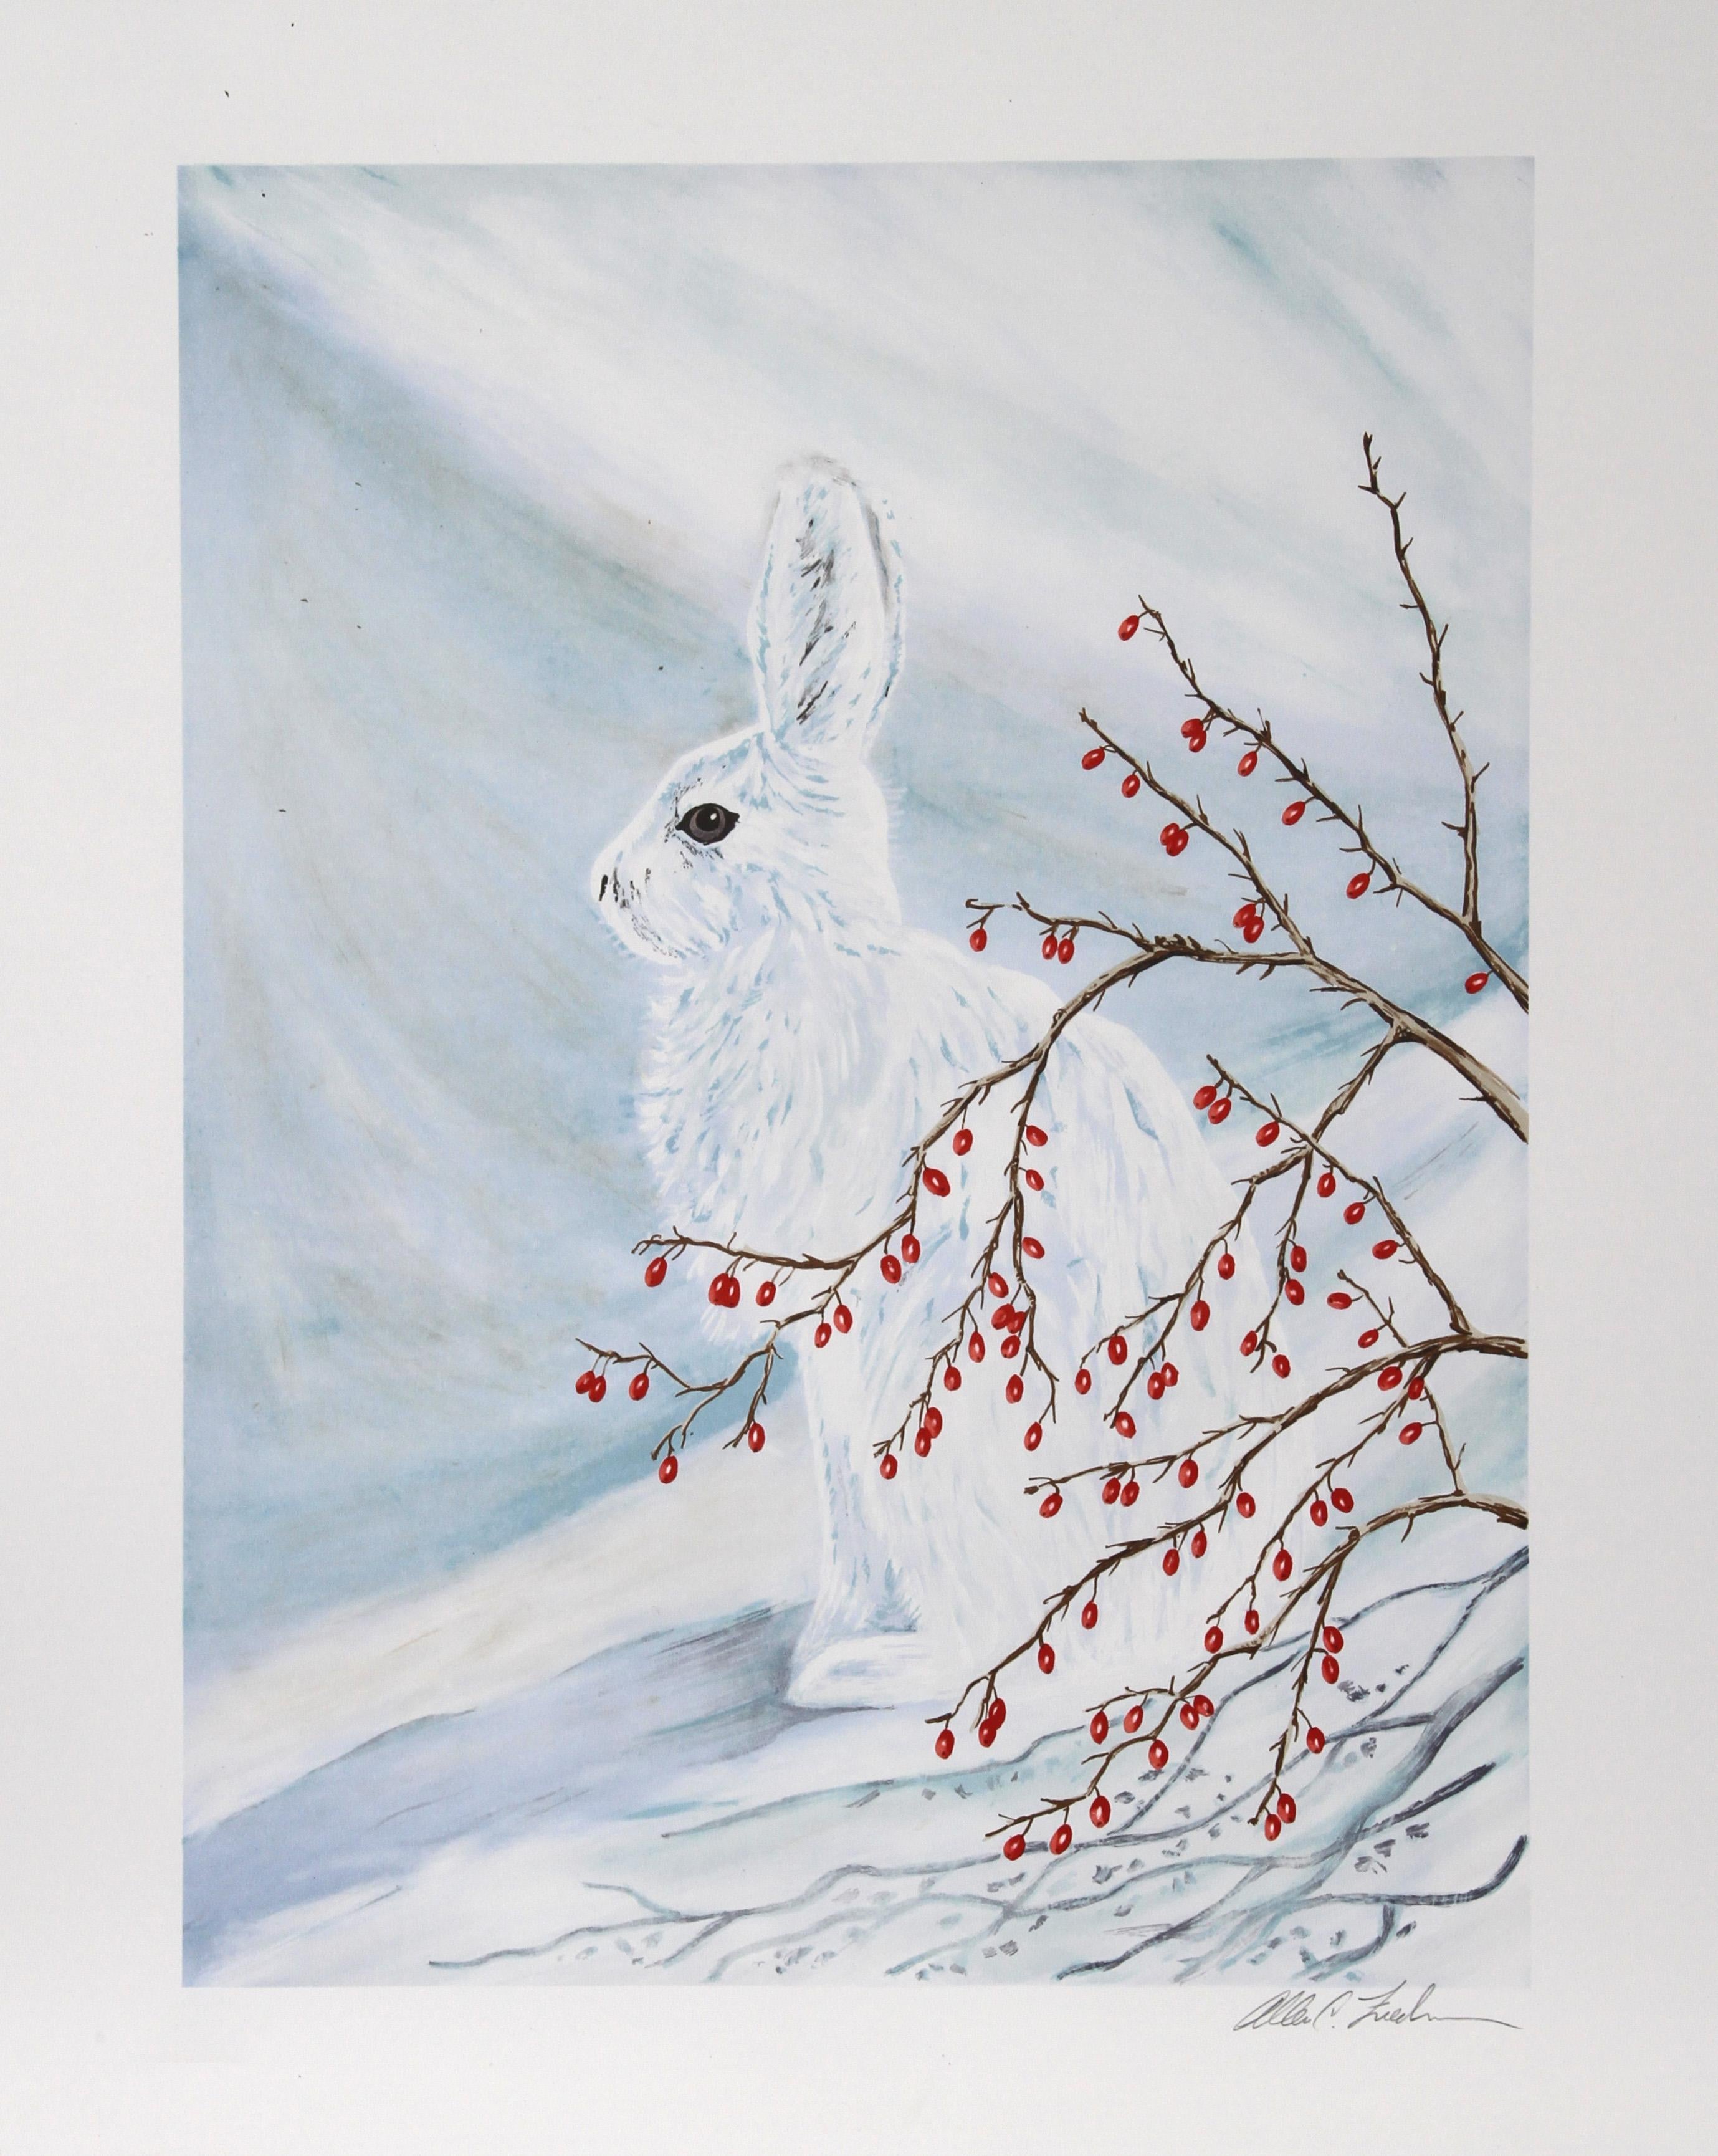 Partially obscured by a bush of winter berries that has lost its leaves, a small snow rabbit sits with its ears up and its body turned to the side. Brown eyes outlined in black, the rabbit’s face is the only part of its body that does not camouflage